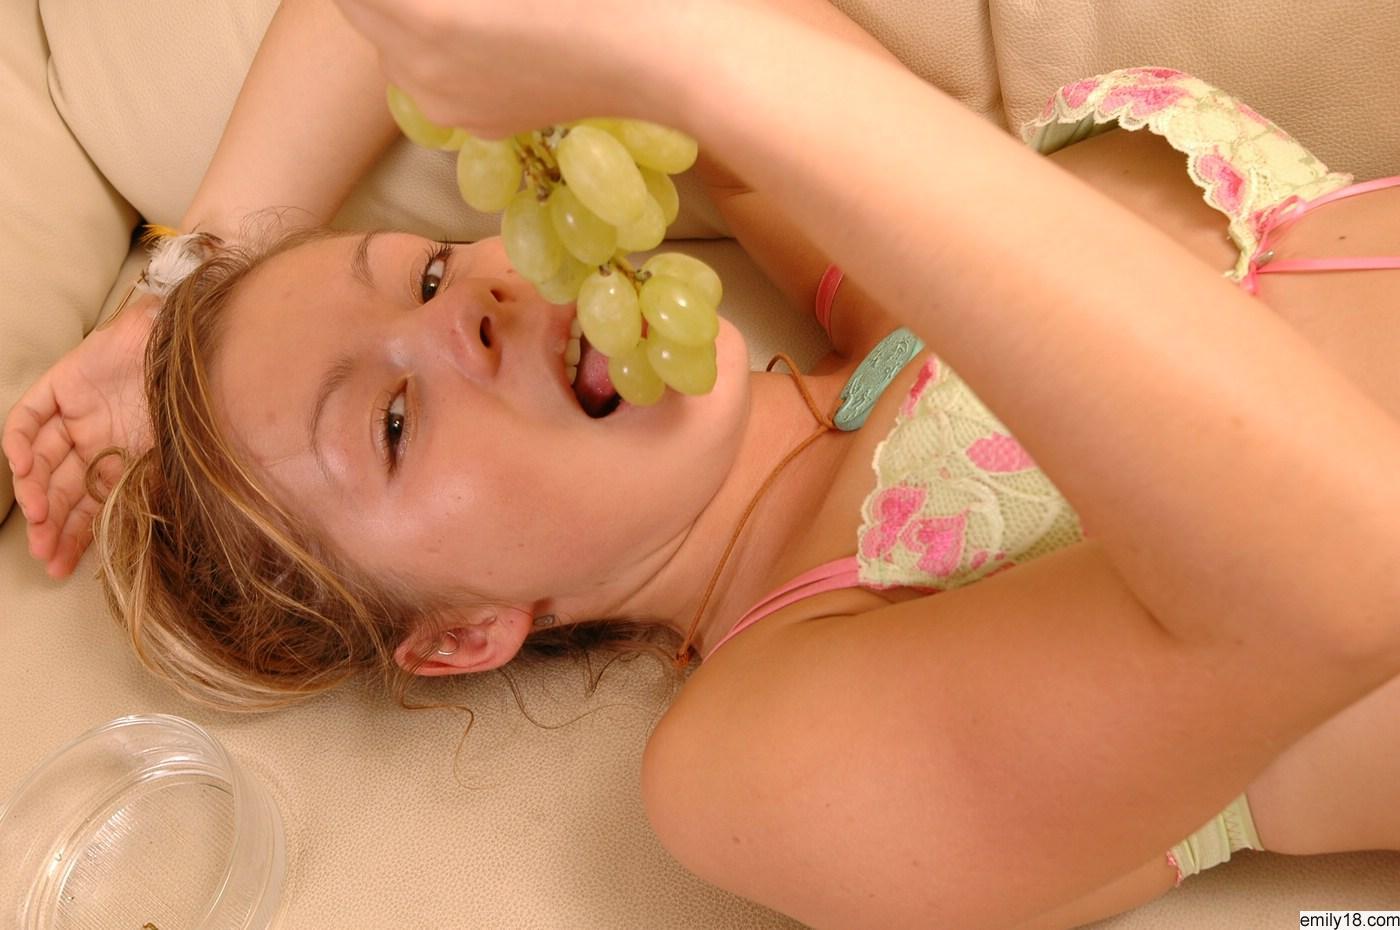 Sweet teen Emily 18 eating grapes topless #54209649